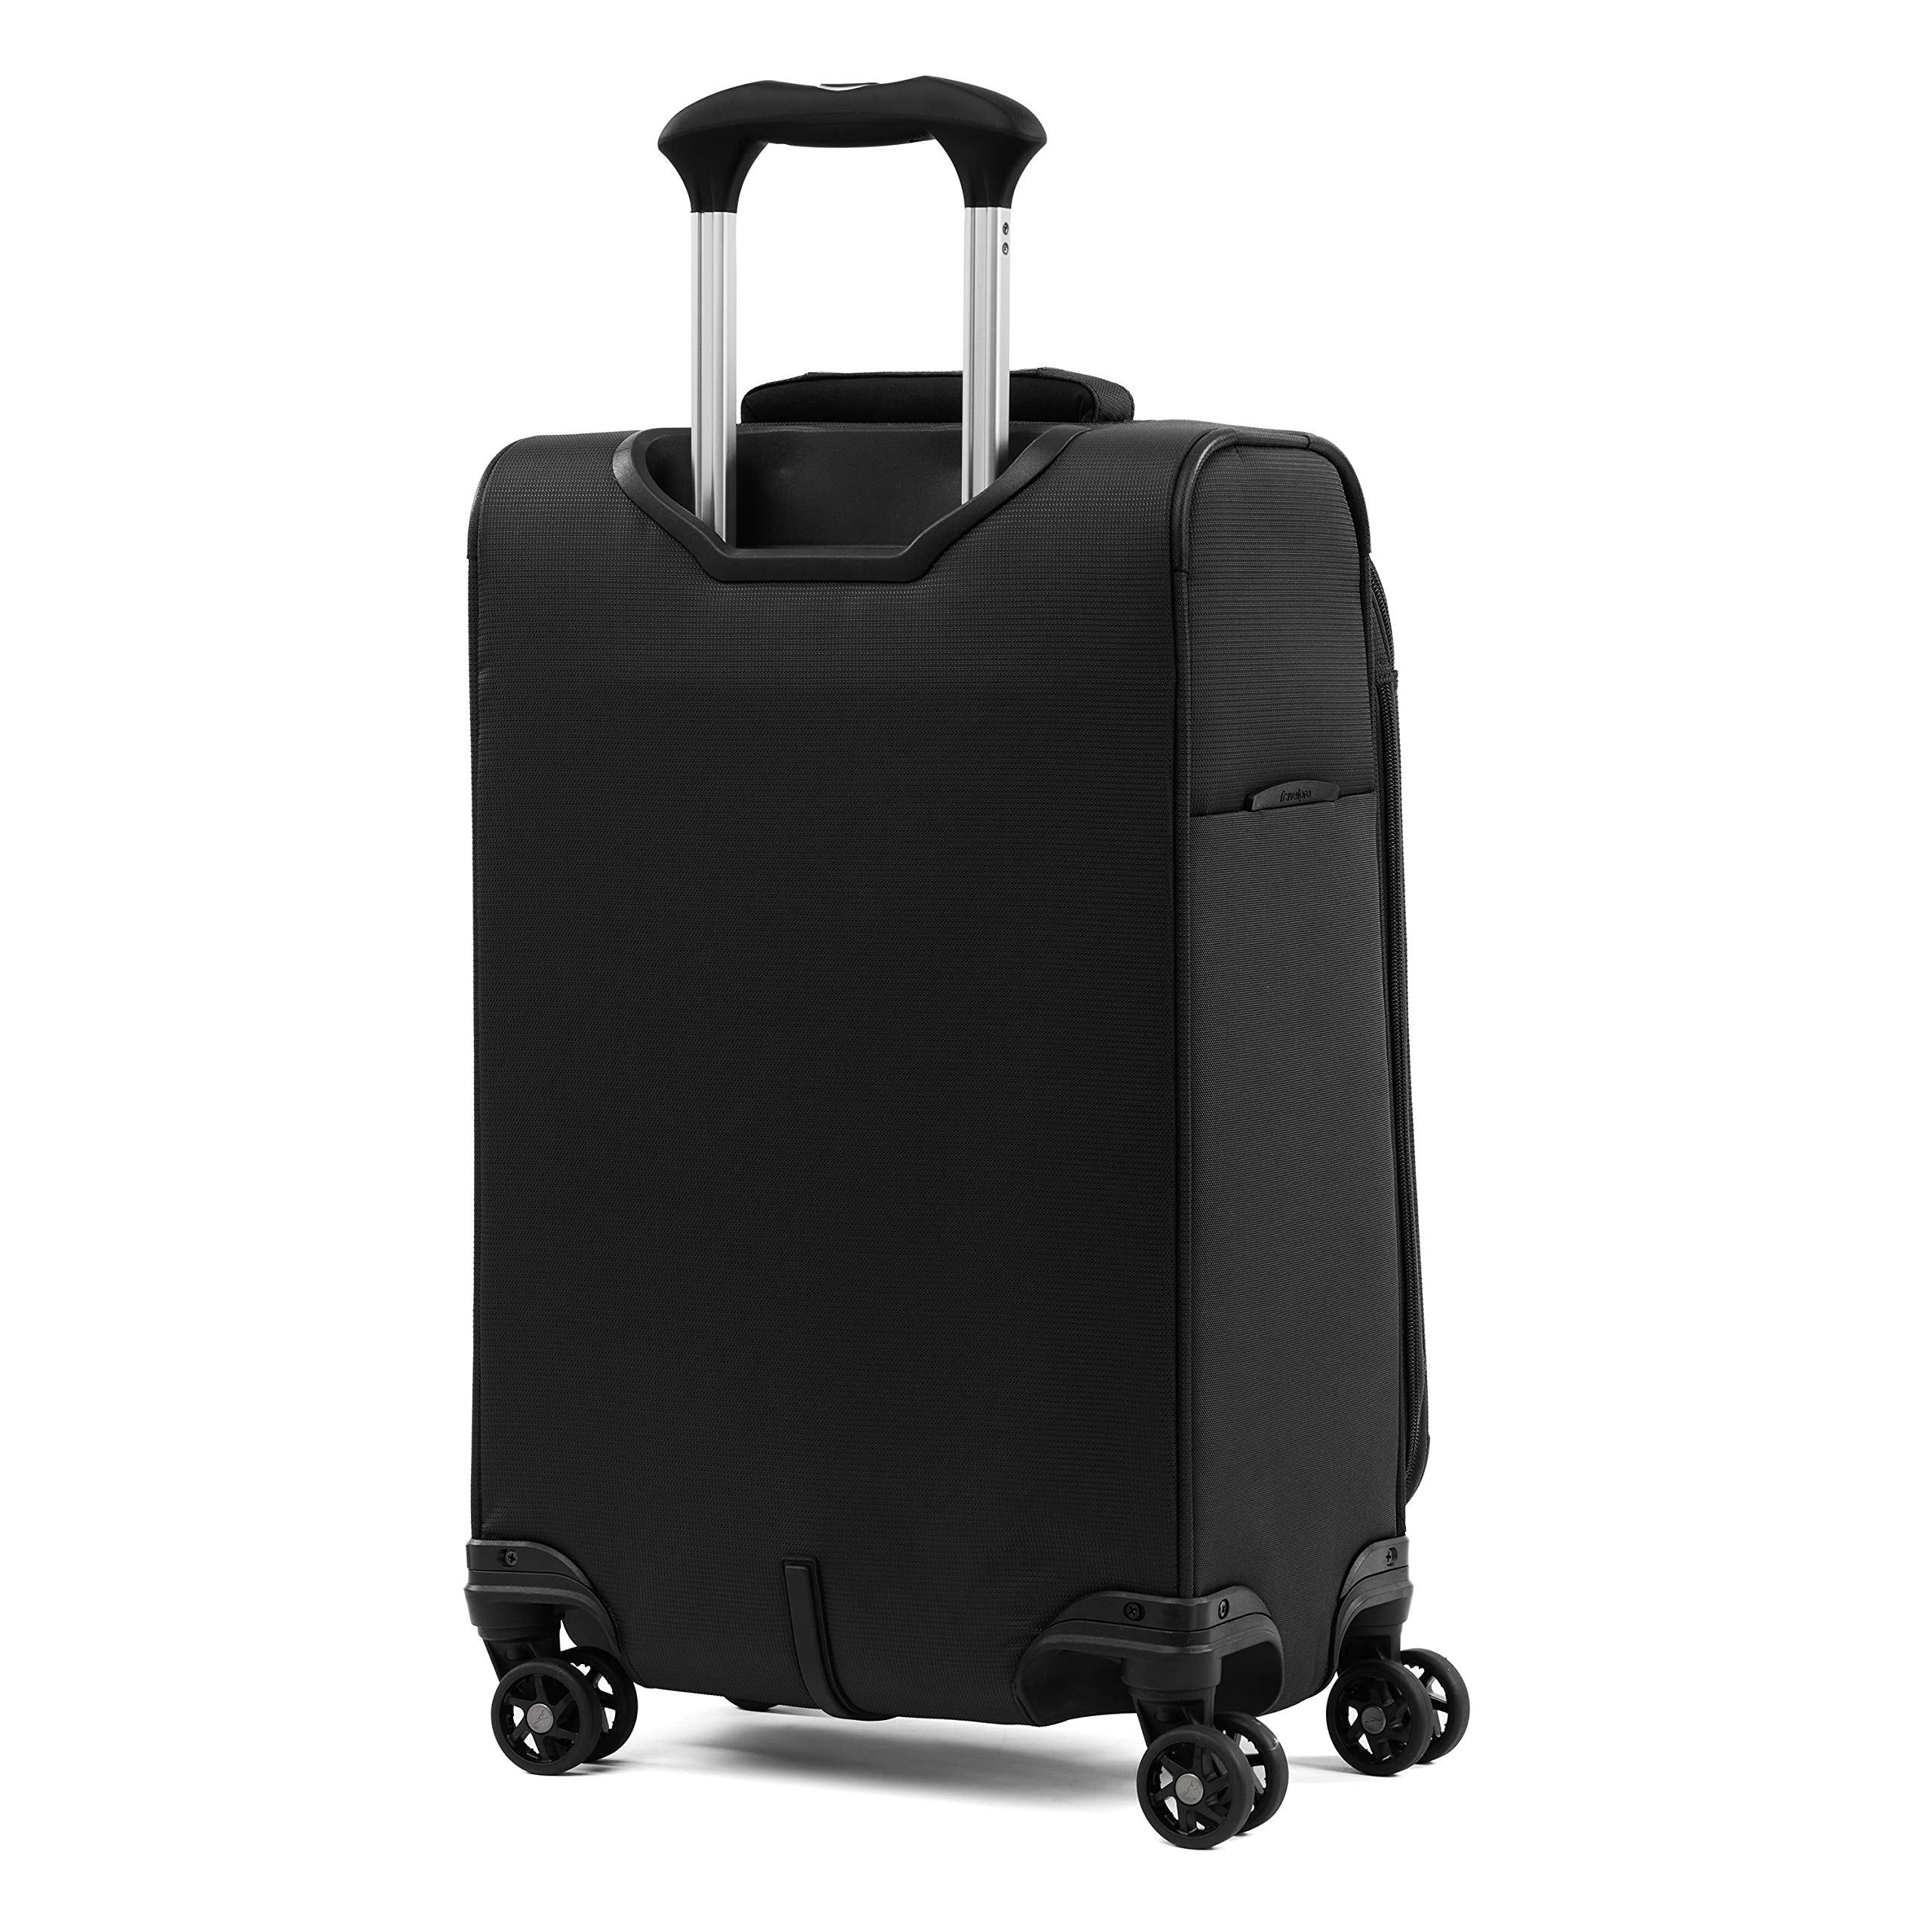 Travelpro Tourlite Softside Expandable Luggage with 4 Spinner Wheels, Lightweight Suitcase, Men and Women U4